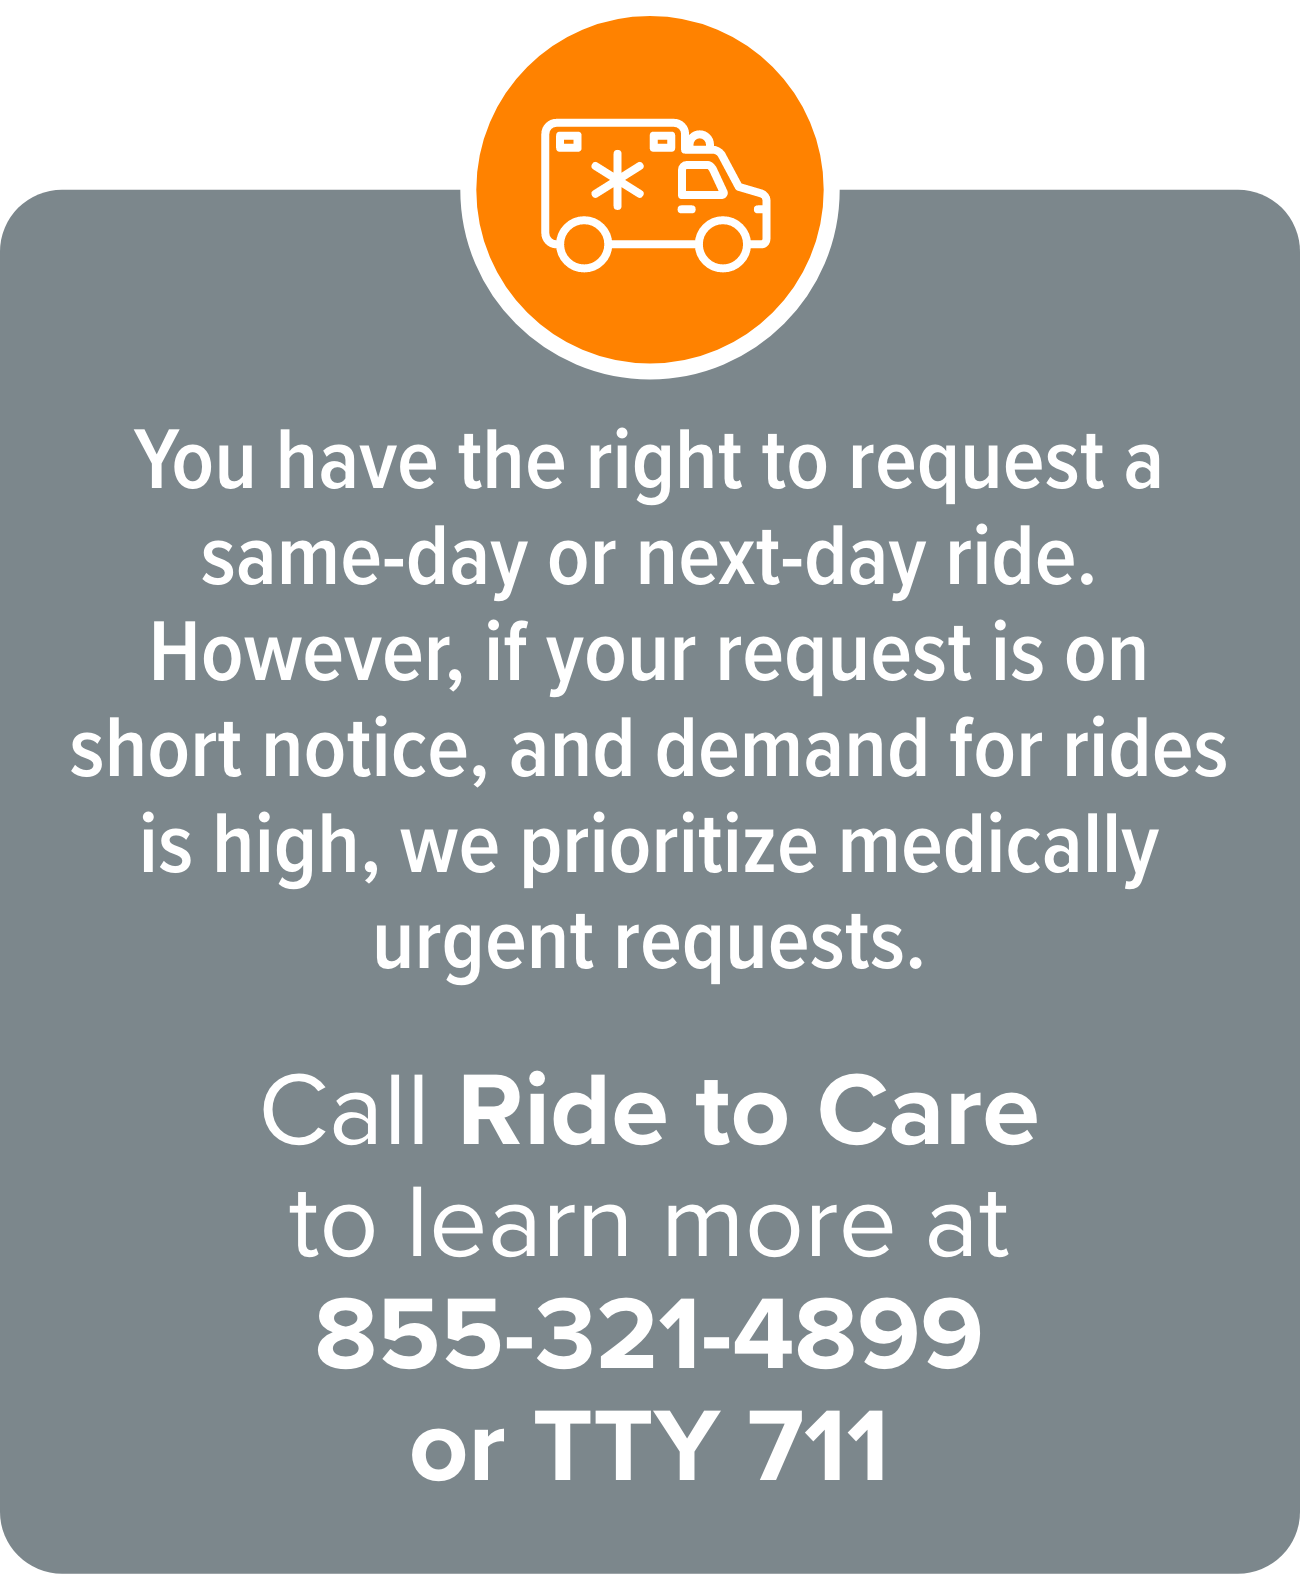 You have the right to request a same-day or next-day ride. However, if your request is on short notice, and demand for rides is high, we prioritize medically urgent requests. Call Ride to Care and learn more at 855-321-4899 or TTY 711.